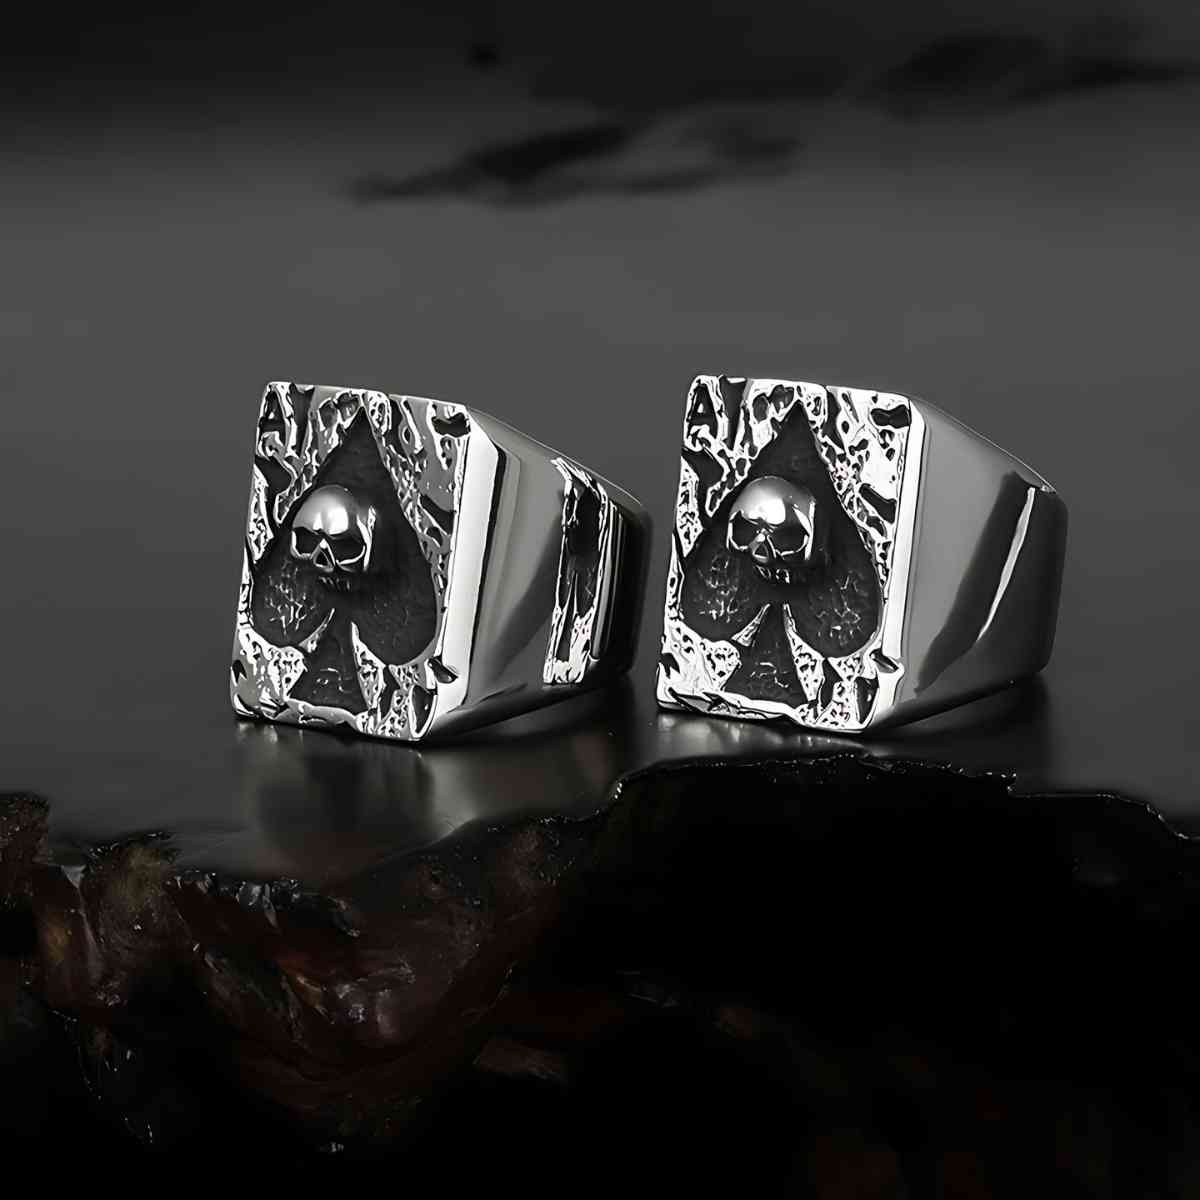 Ace of Spade with Skull Ring - Xenos Jewelry